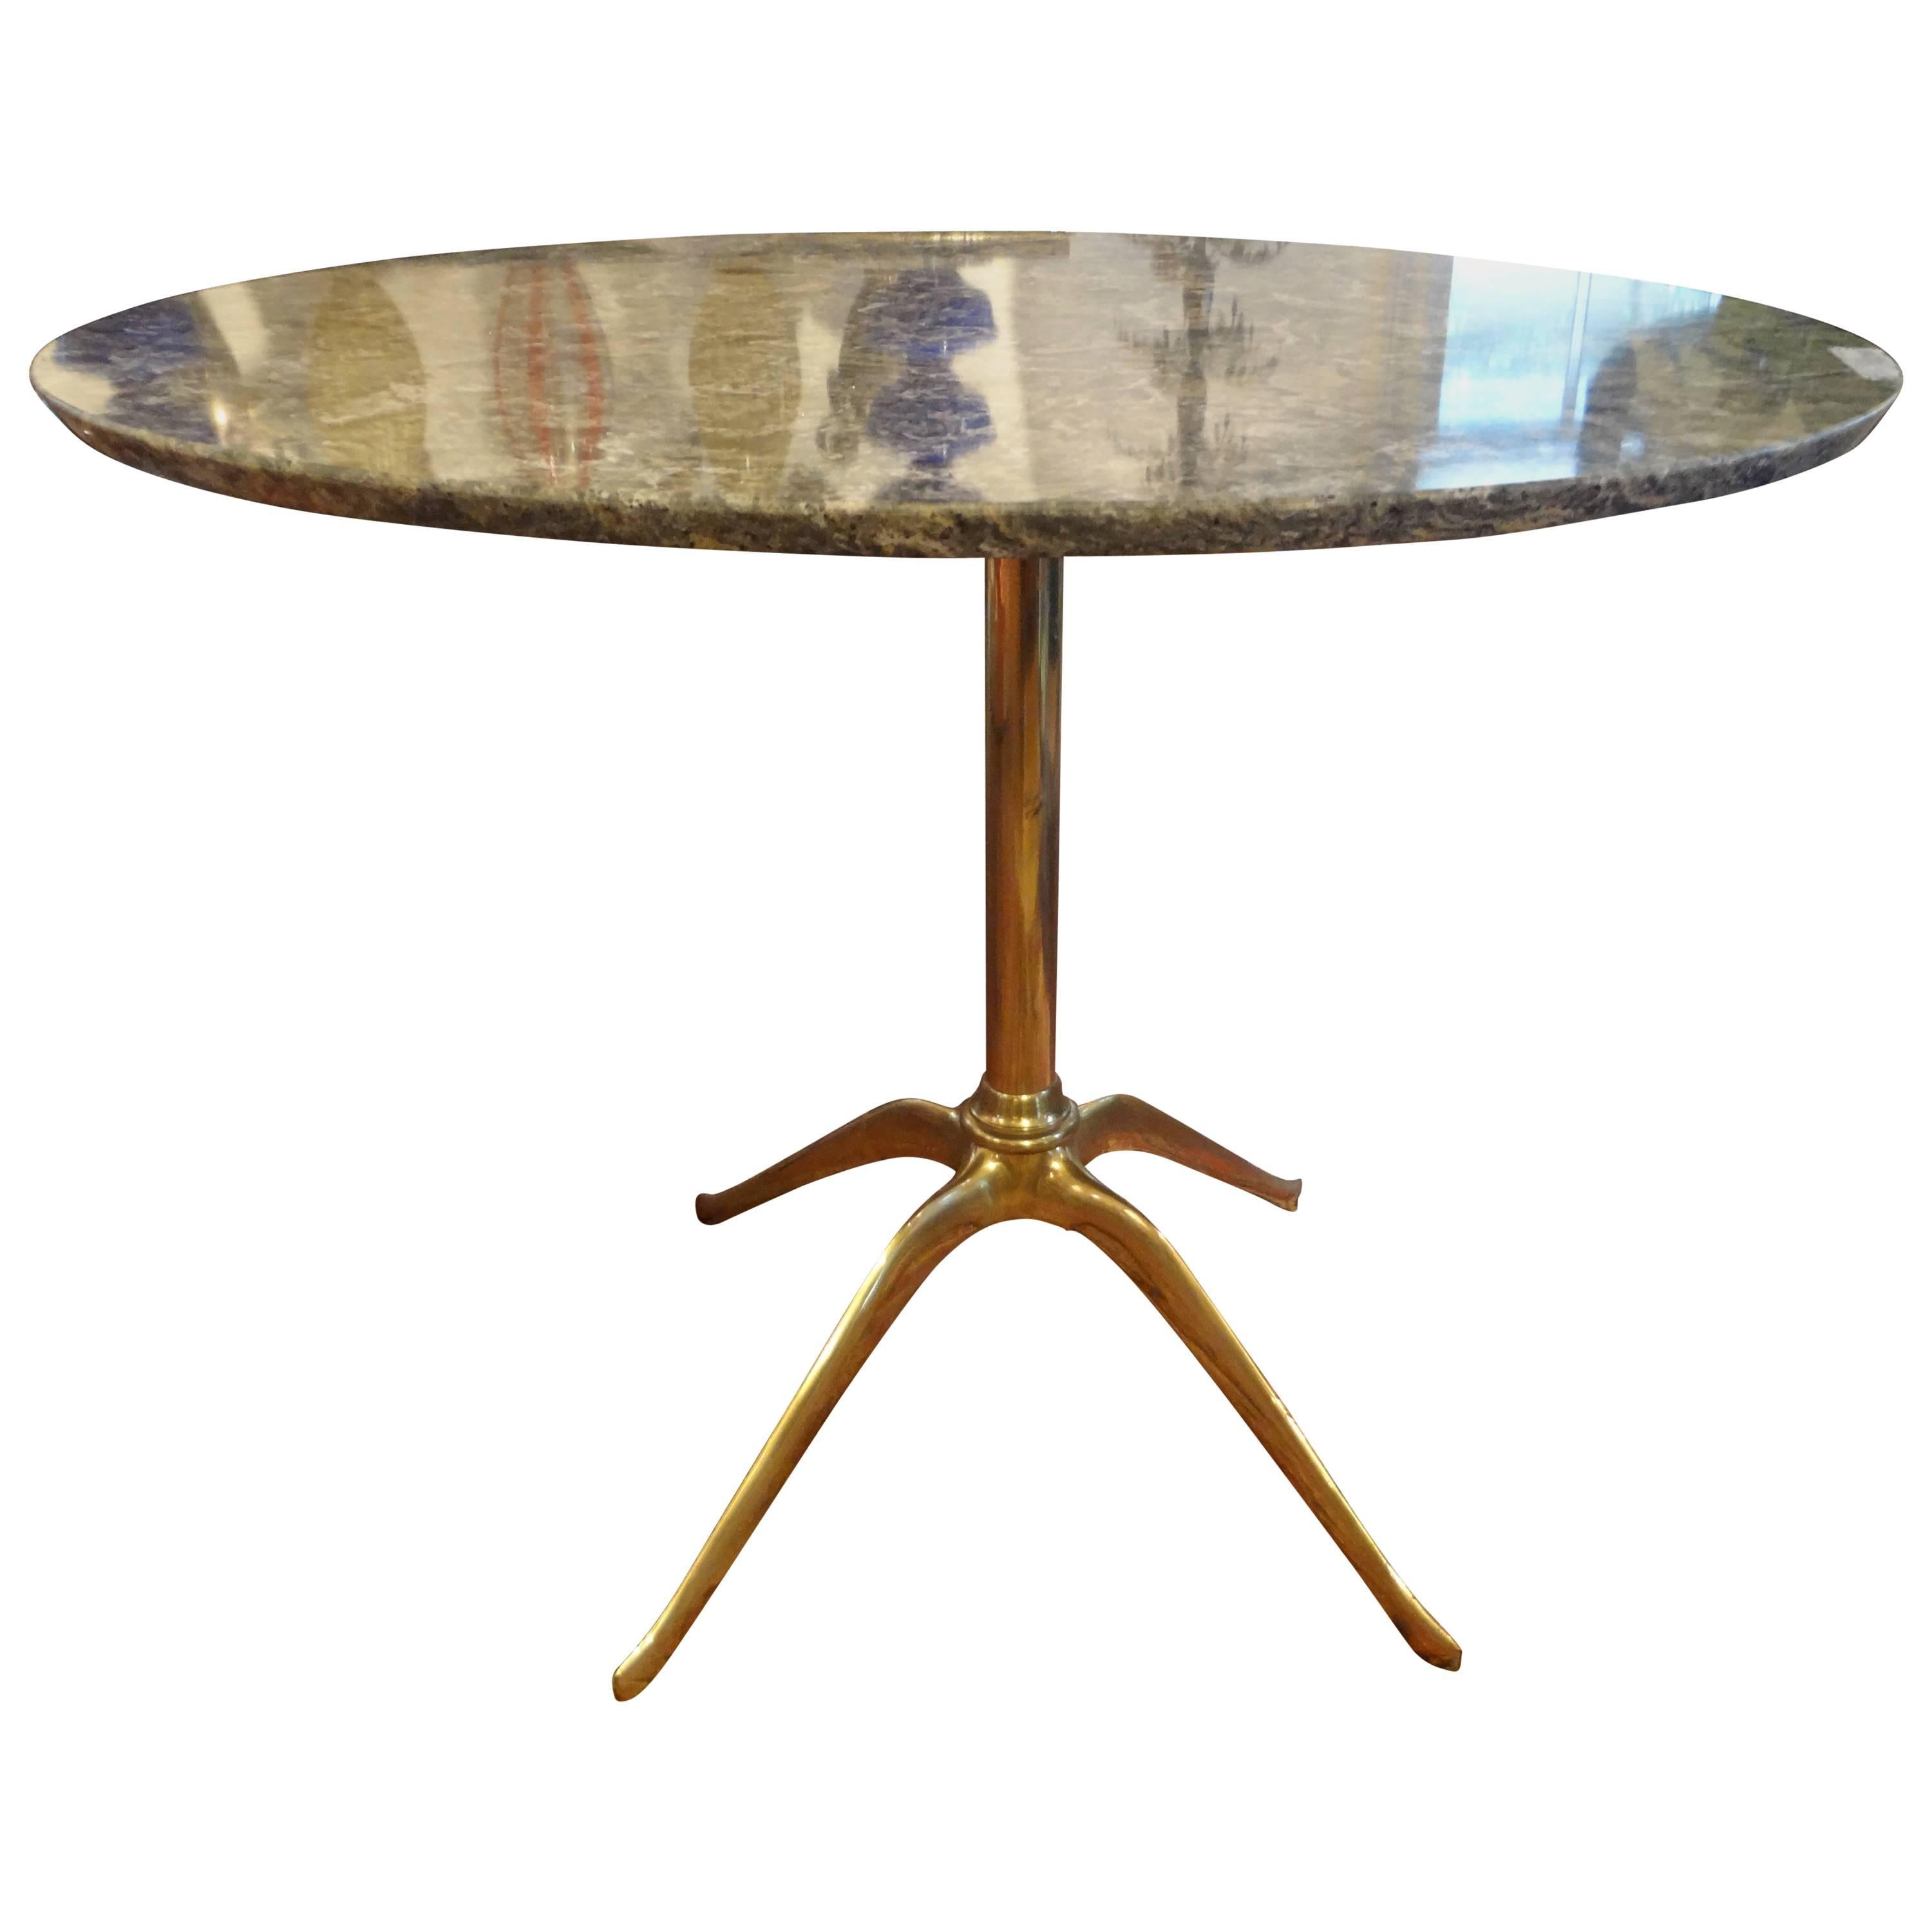 Italian brass Mid-Century Modern centre or dining table with marble top inspired by Gio Ponti From Milan, circa 1950.